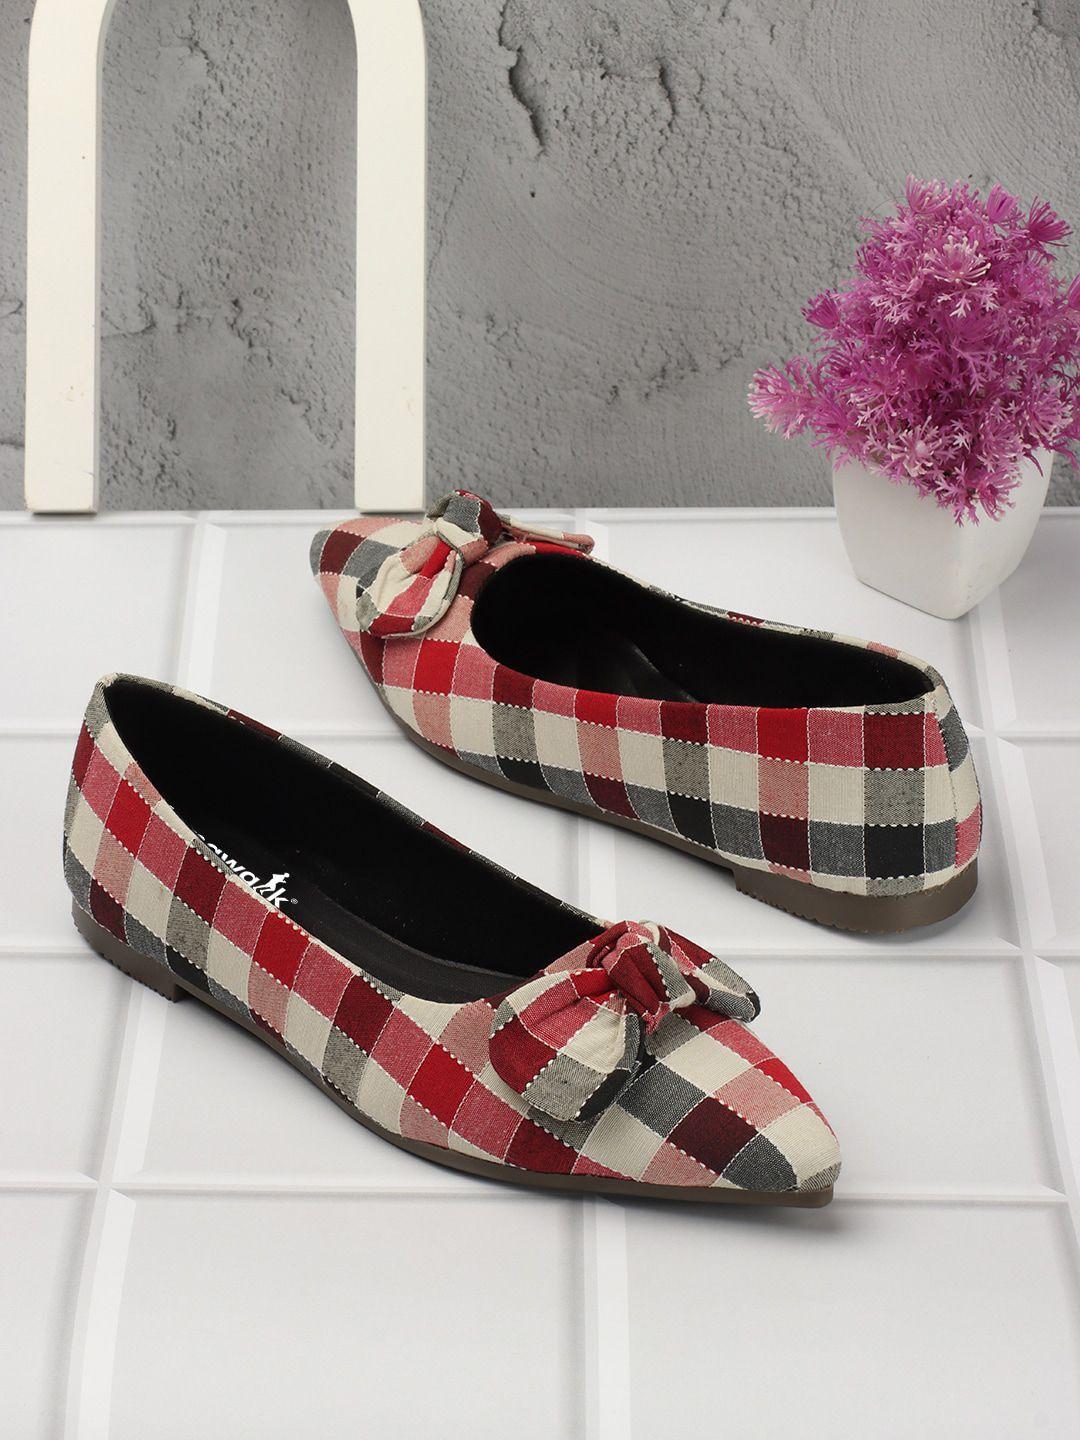 longwalk pointed toe checked ballerinas with bows